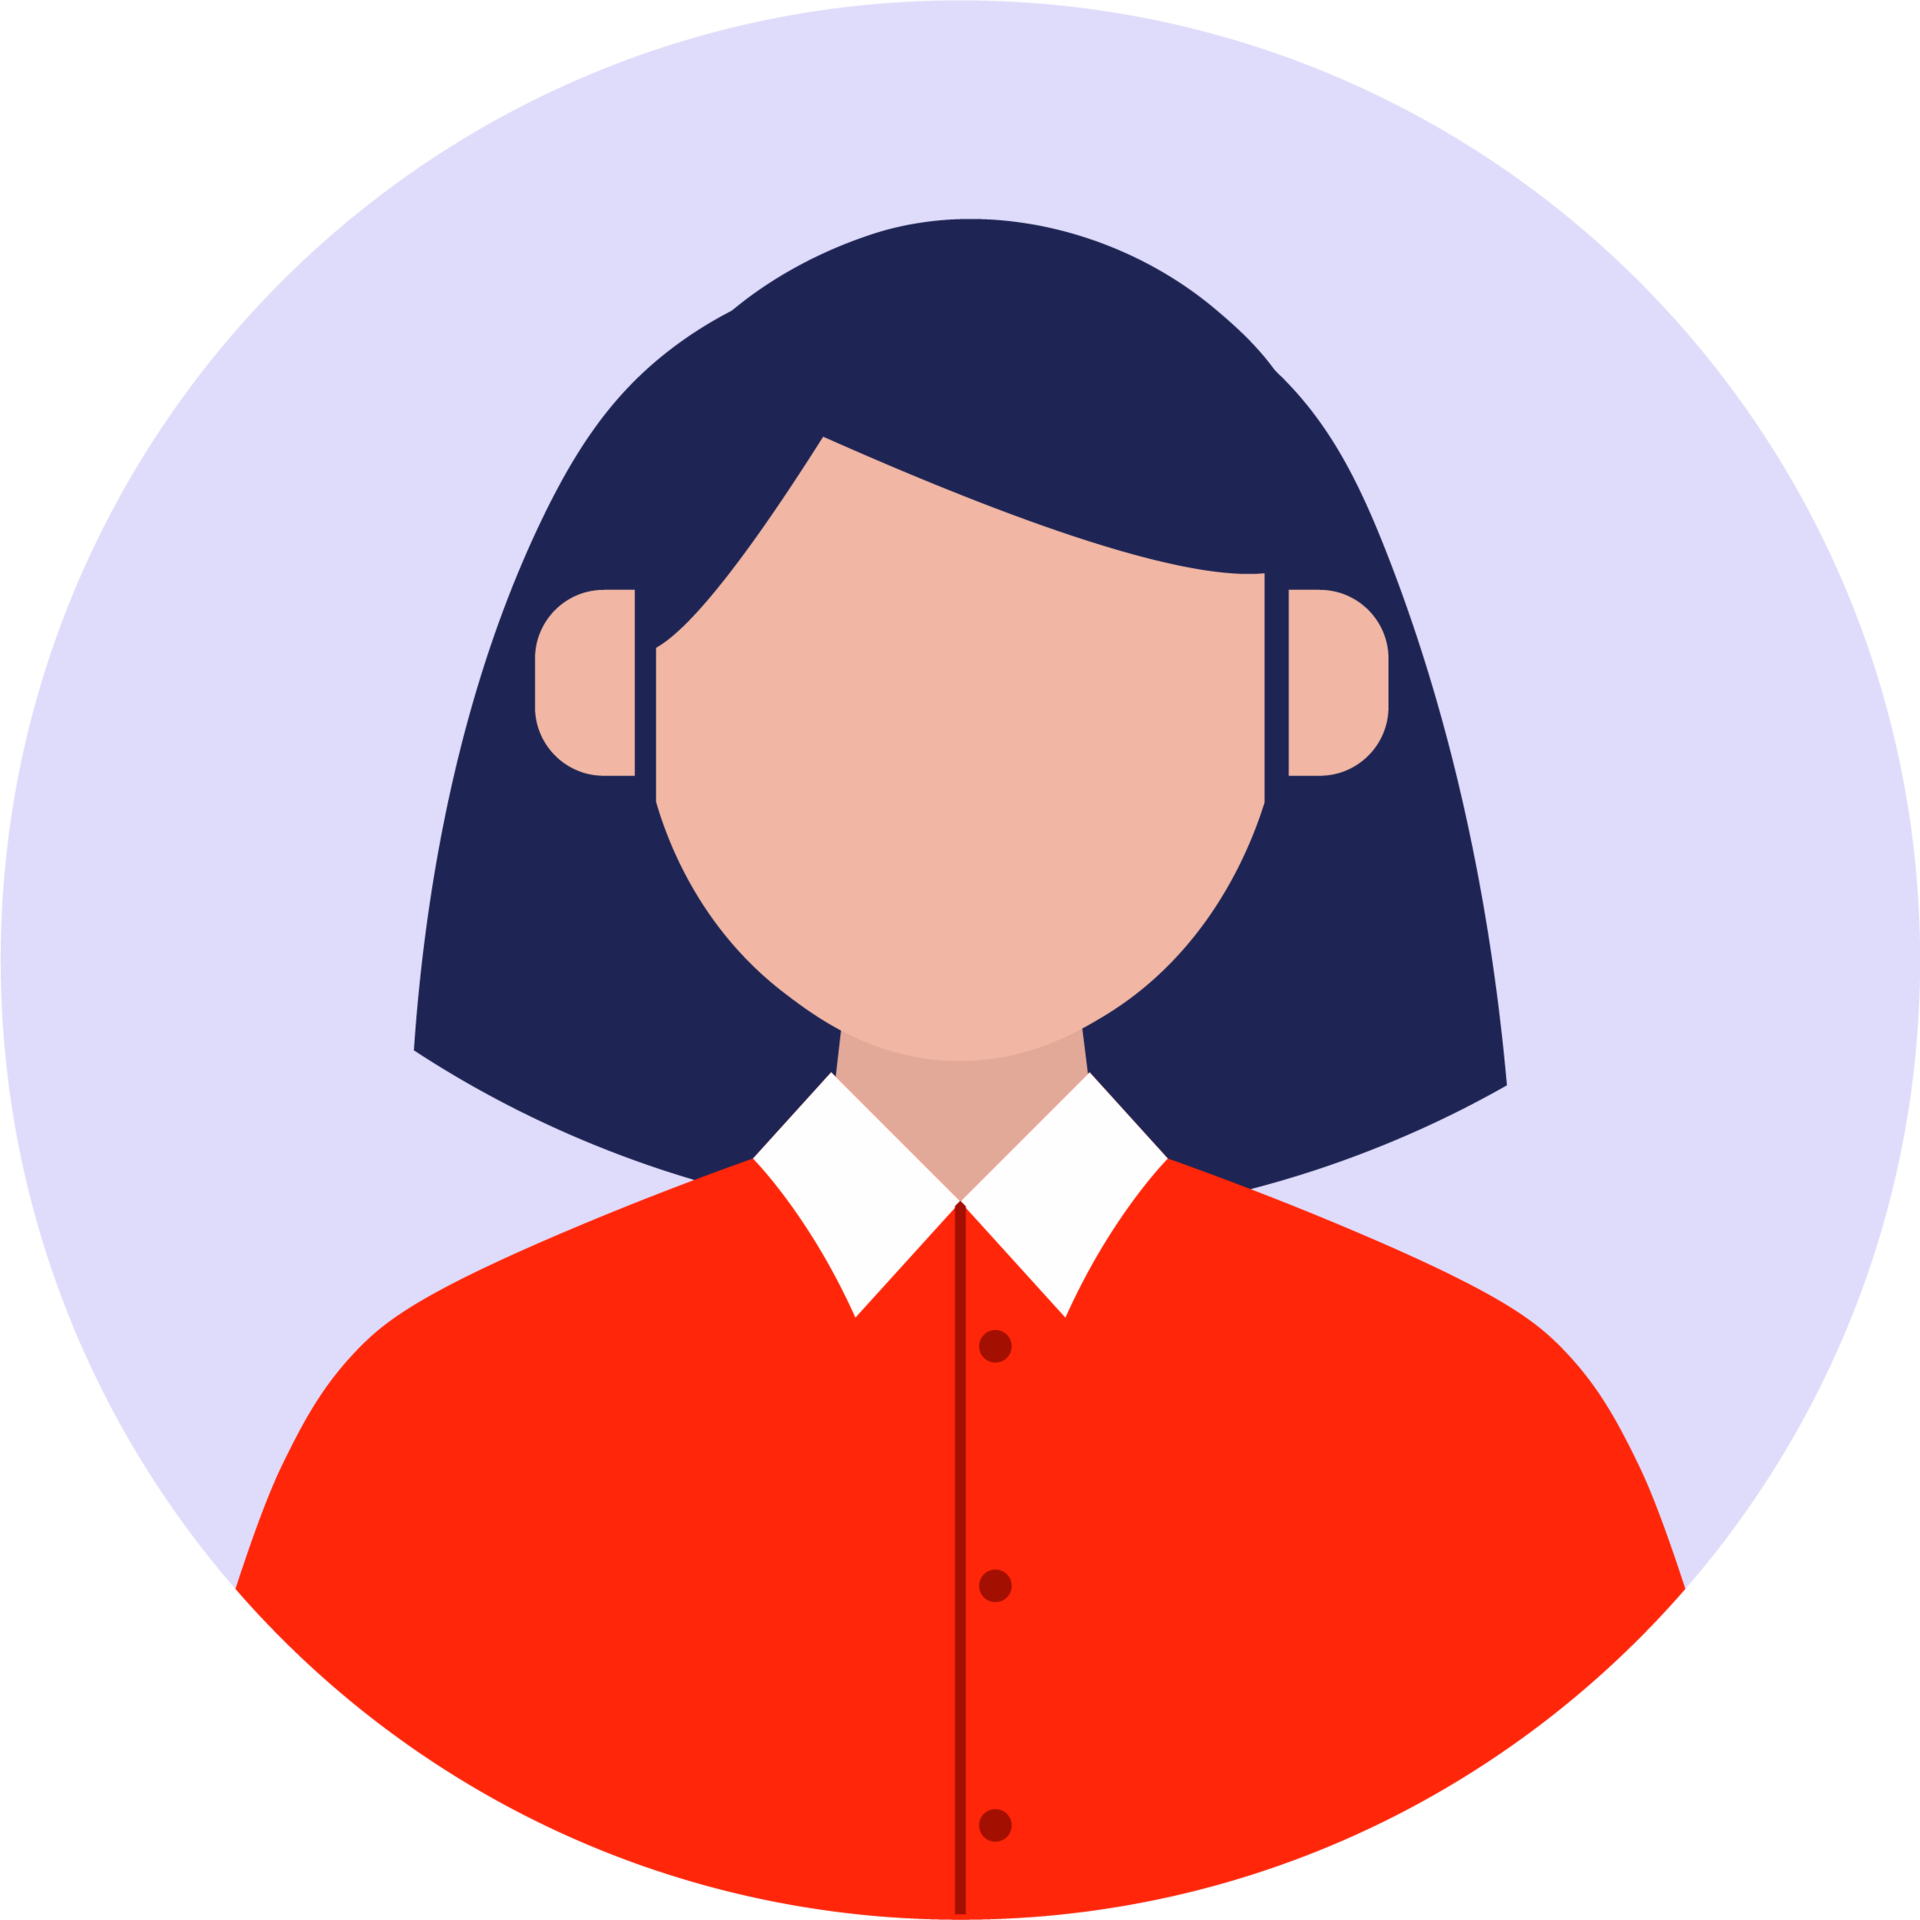 female-user-avatar-icon-in-flat-design-style-person-signs-illustration-png